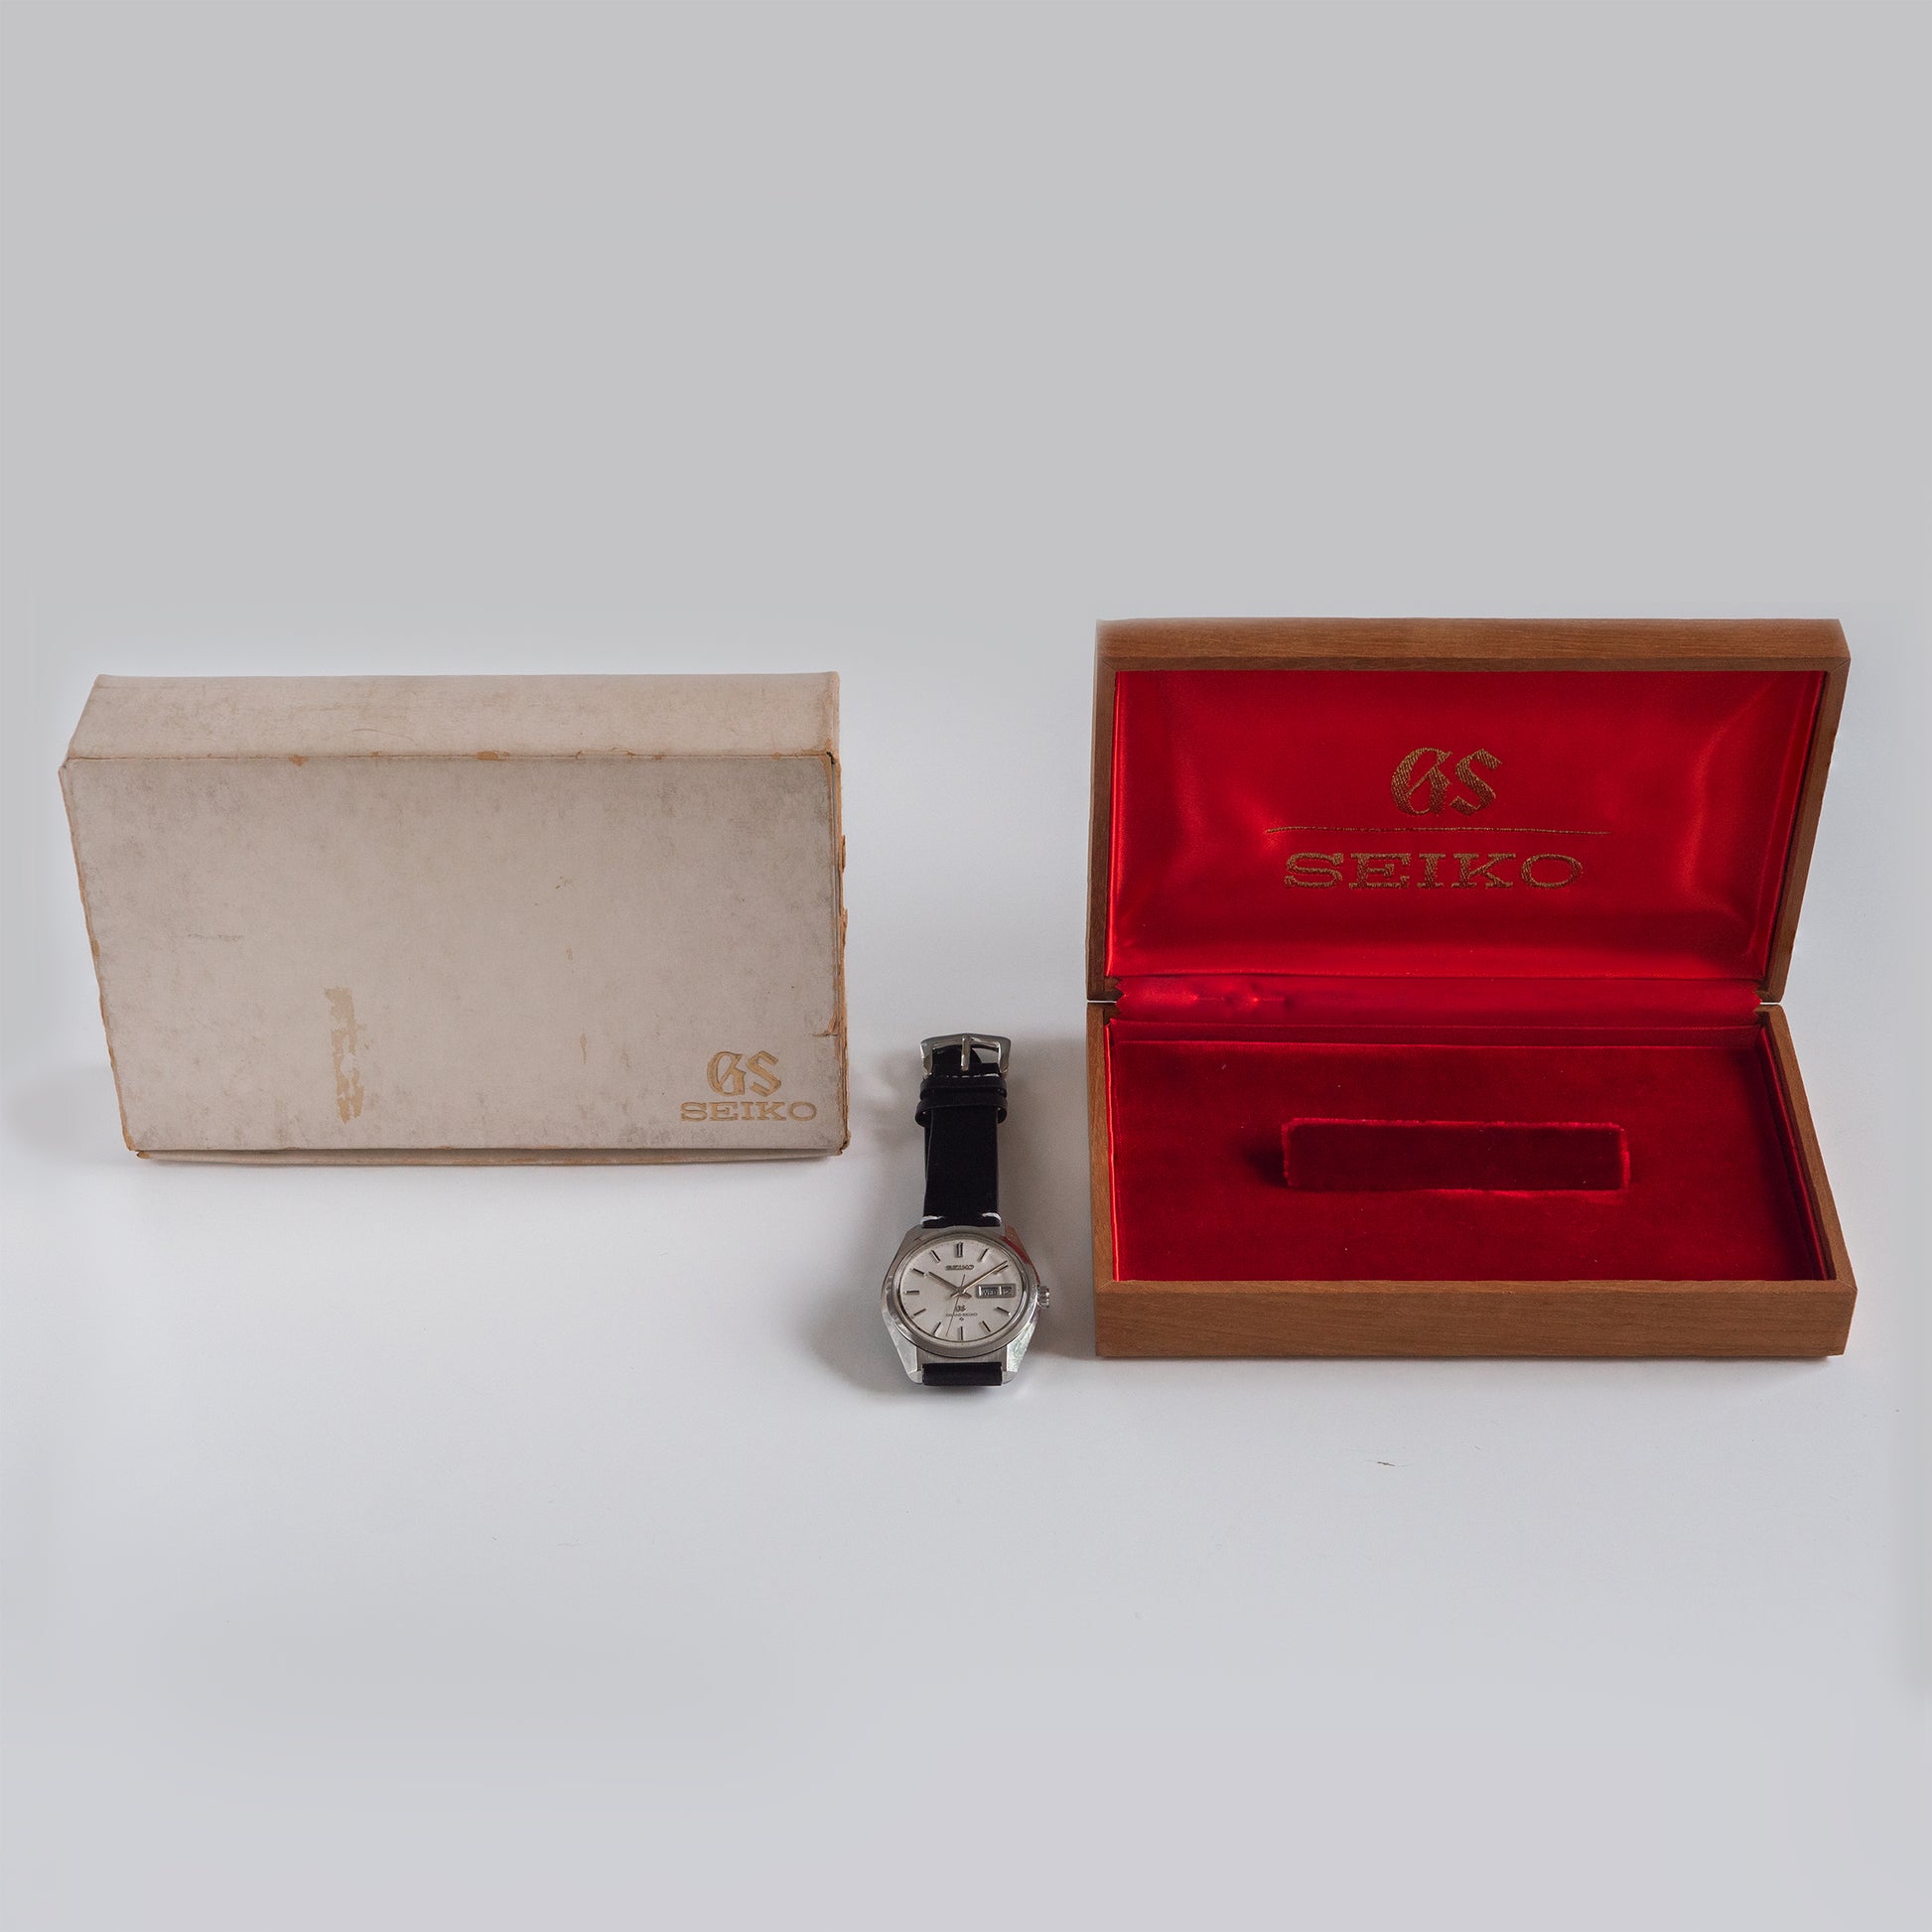 No. 256 / Grand Seiko 61GS with Box - 1967 – From Time To Times